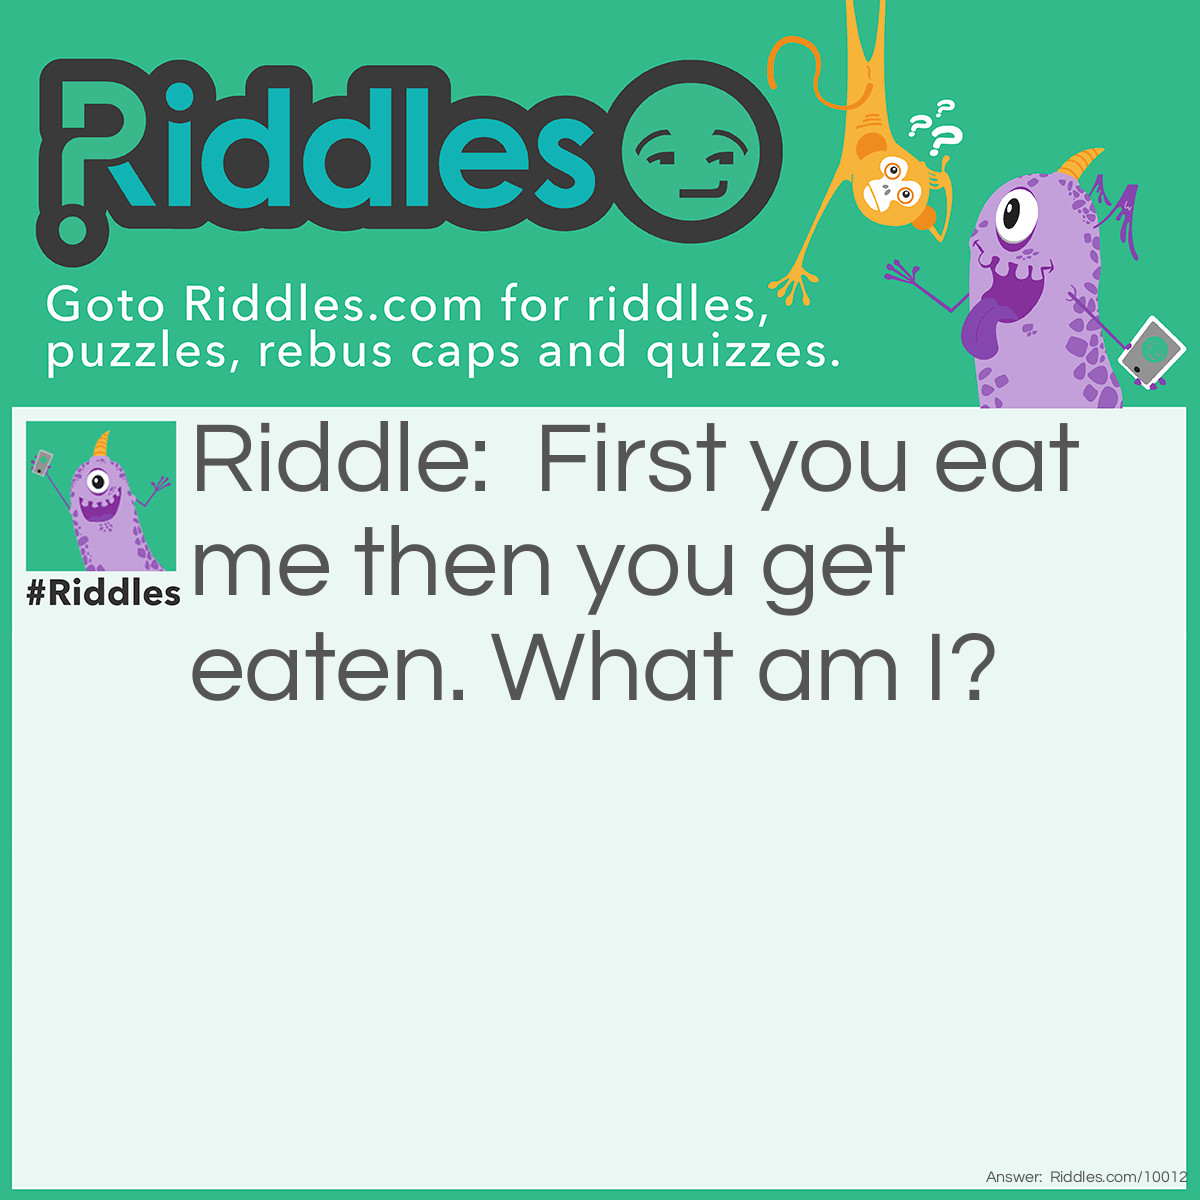 Riddle: First you eat me then you get eaten. What am I? Answer: A fish hook.